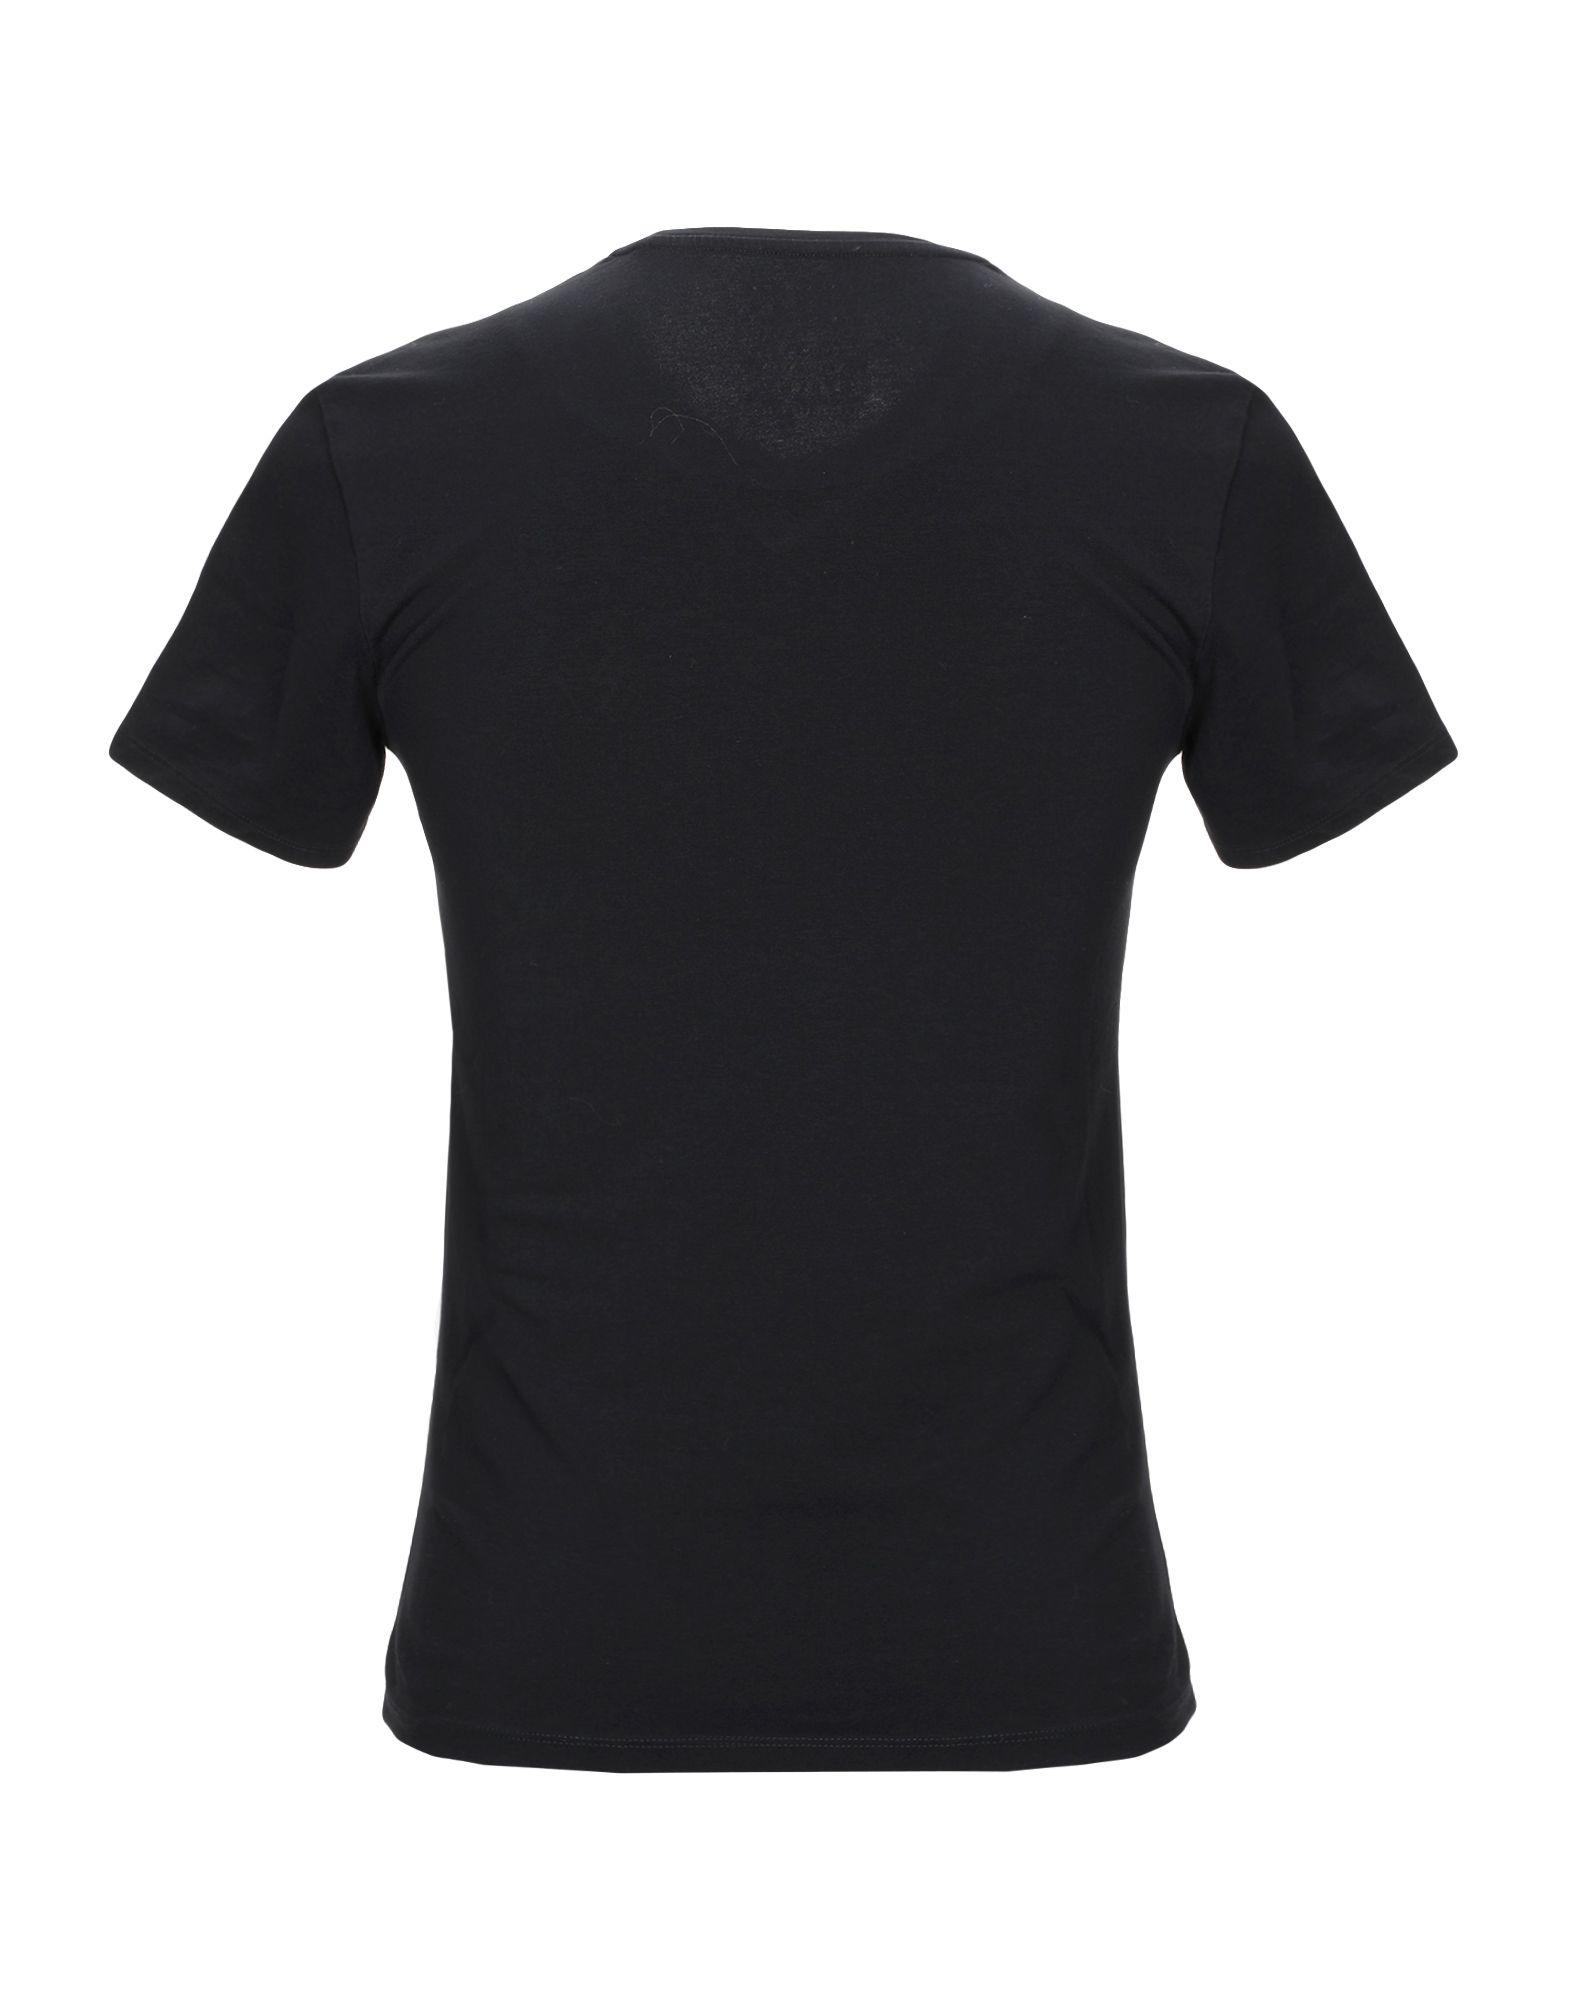 Guess T-shirt in Black for Men - Lyst